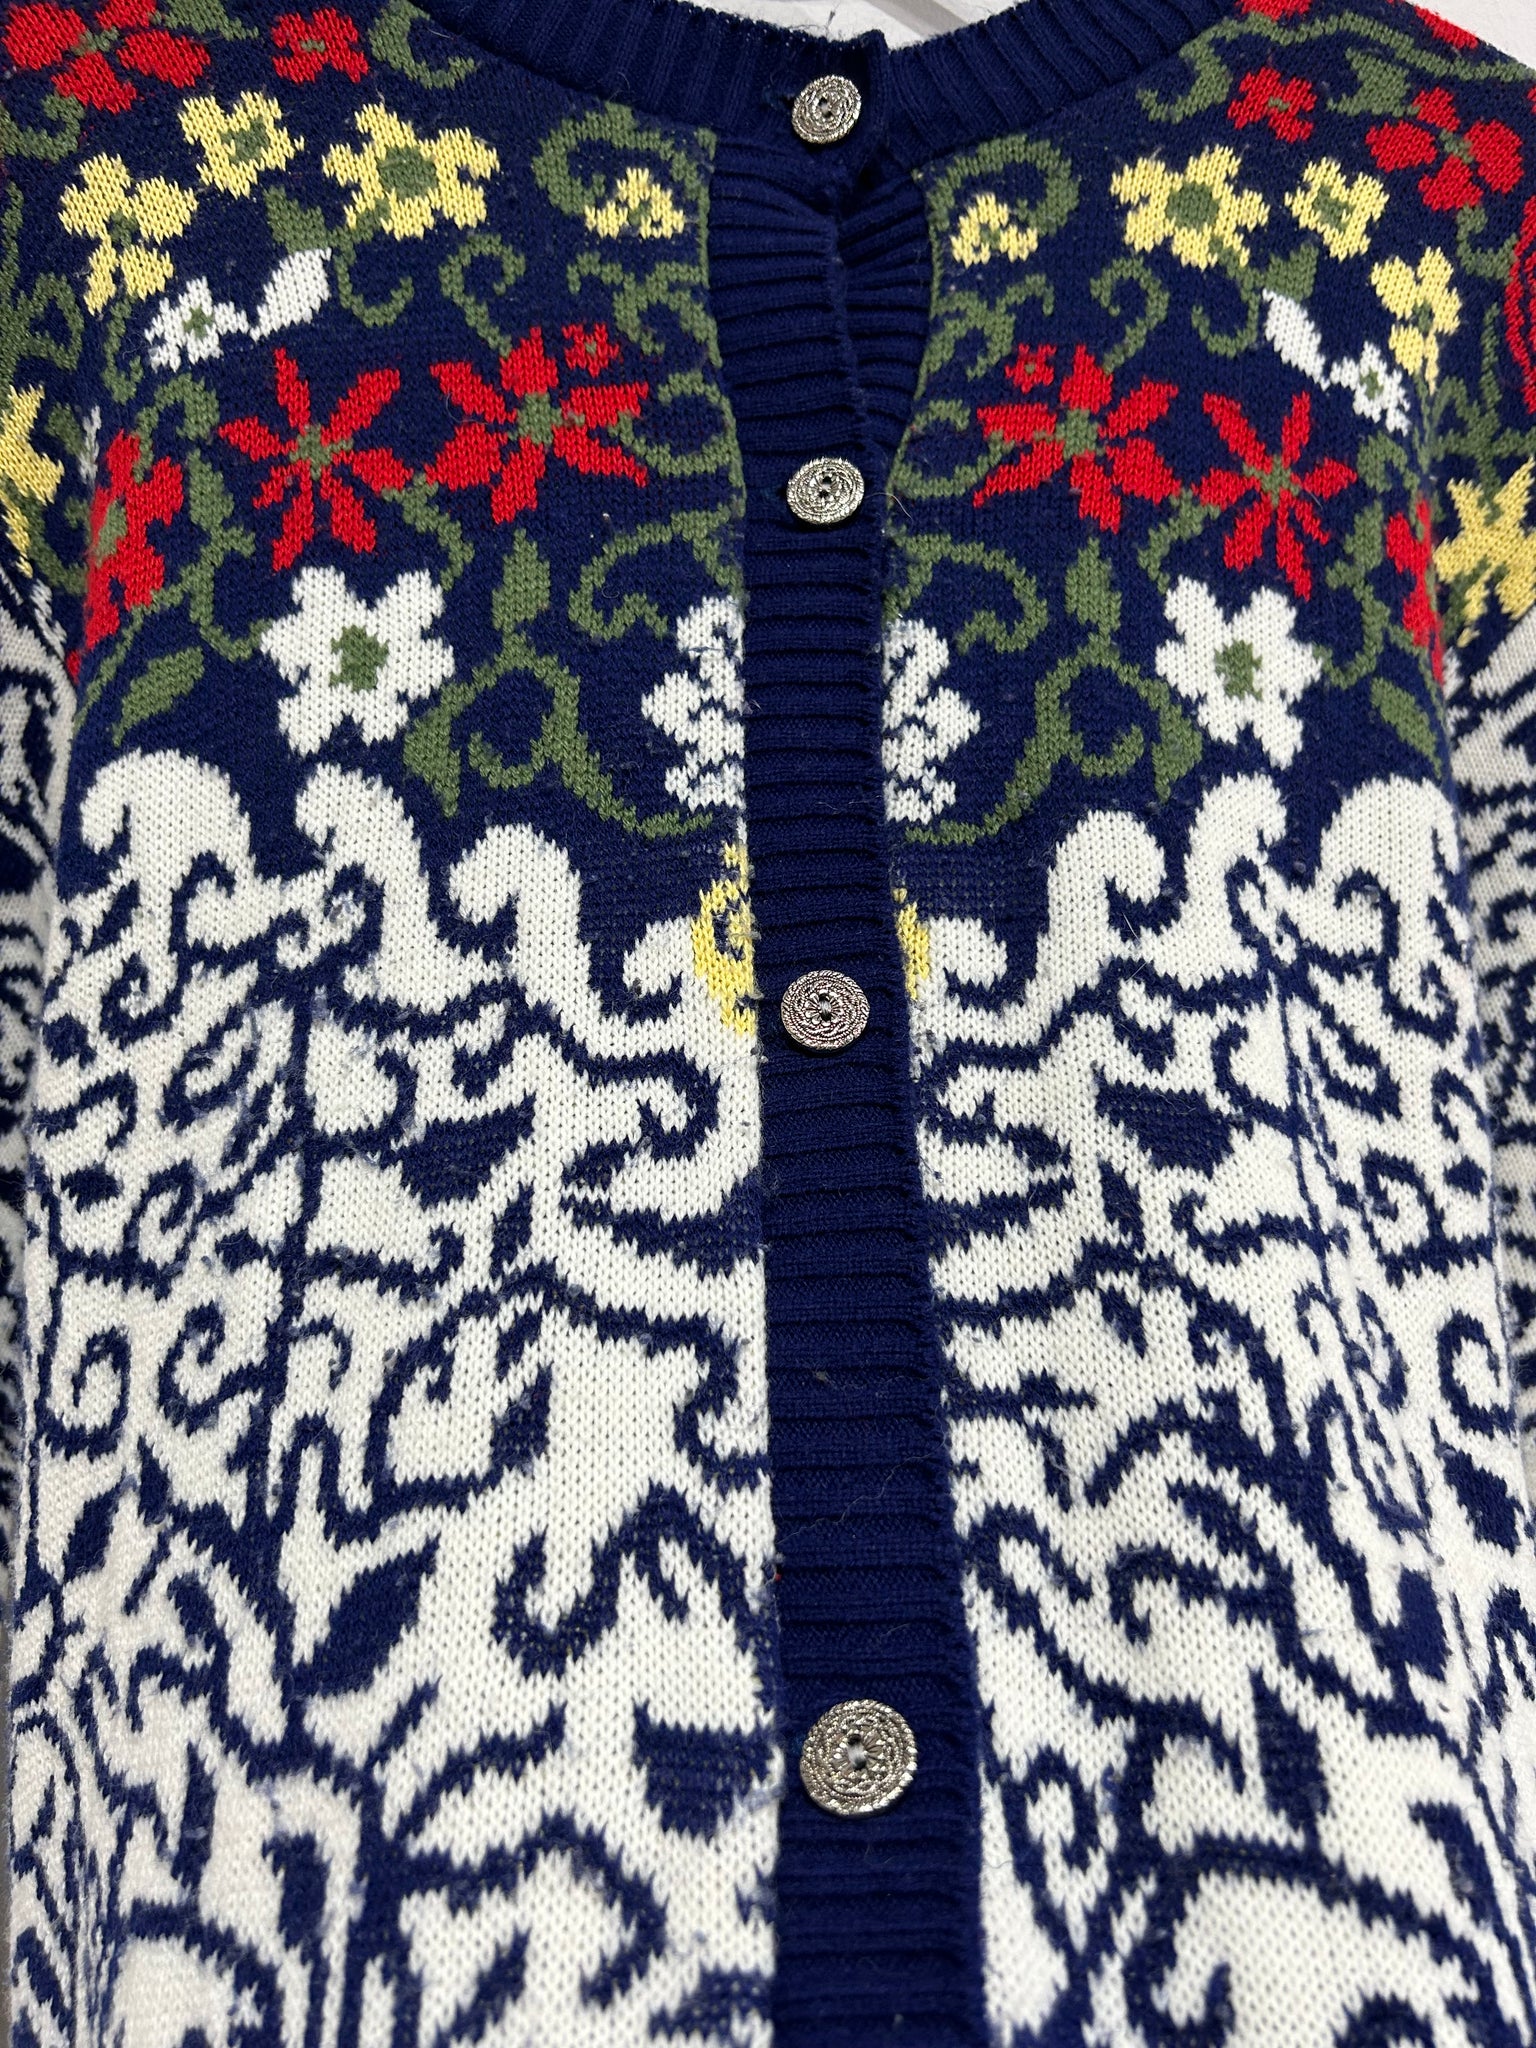 Thrifted vintage & pre-loved knitted cardigans part 1